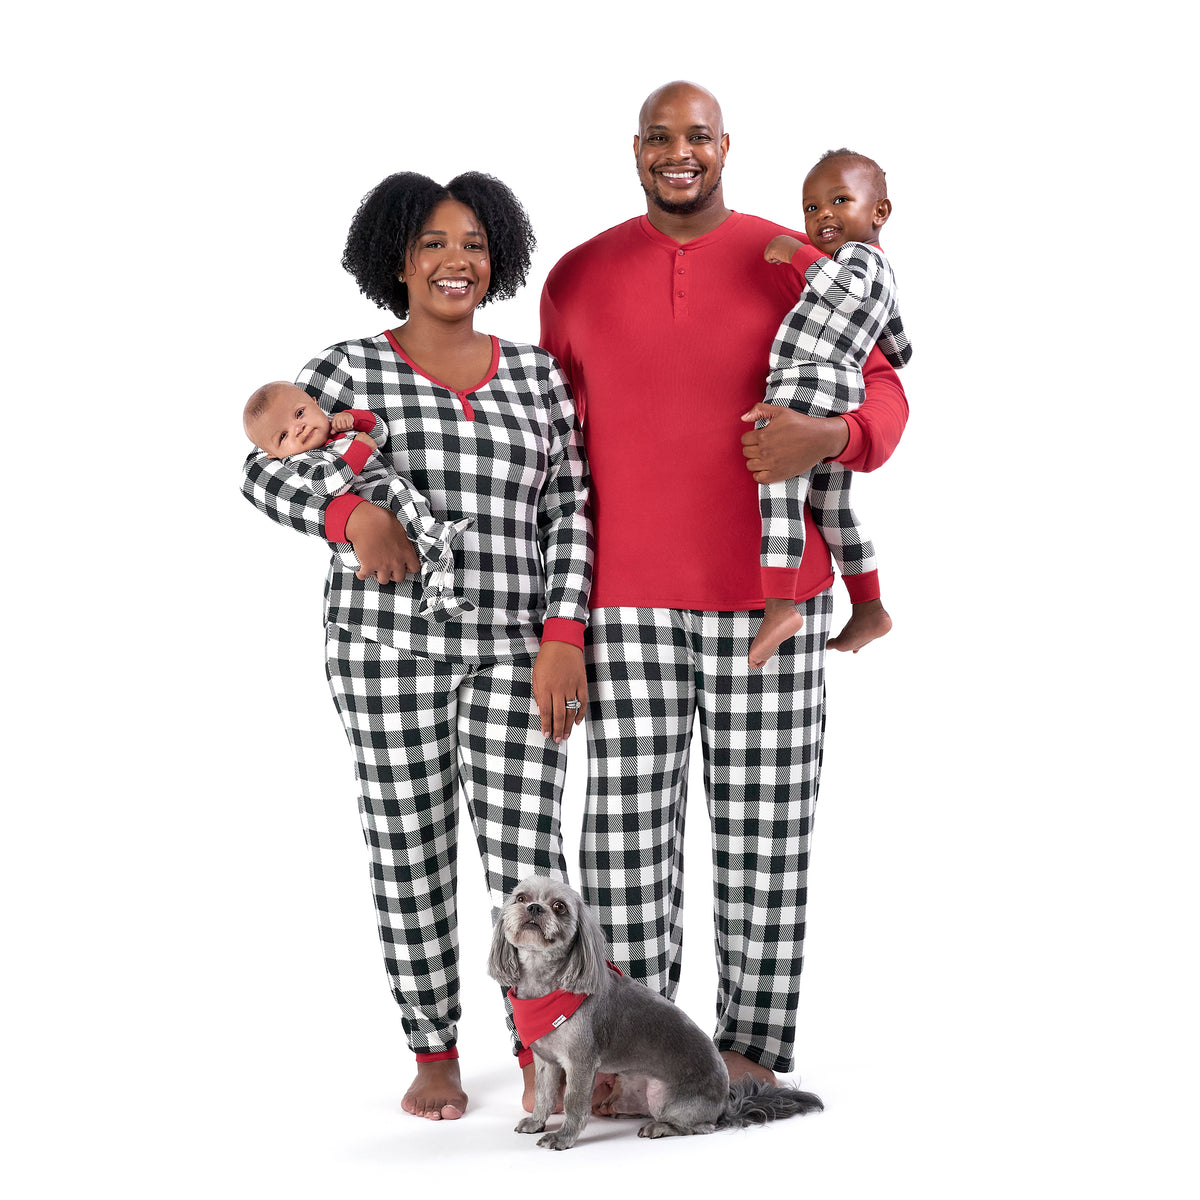 A cheerful family, donning matching pajamas tailored for Christmas and holiday occasions, posing happily for a memorable photograph.